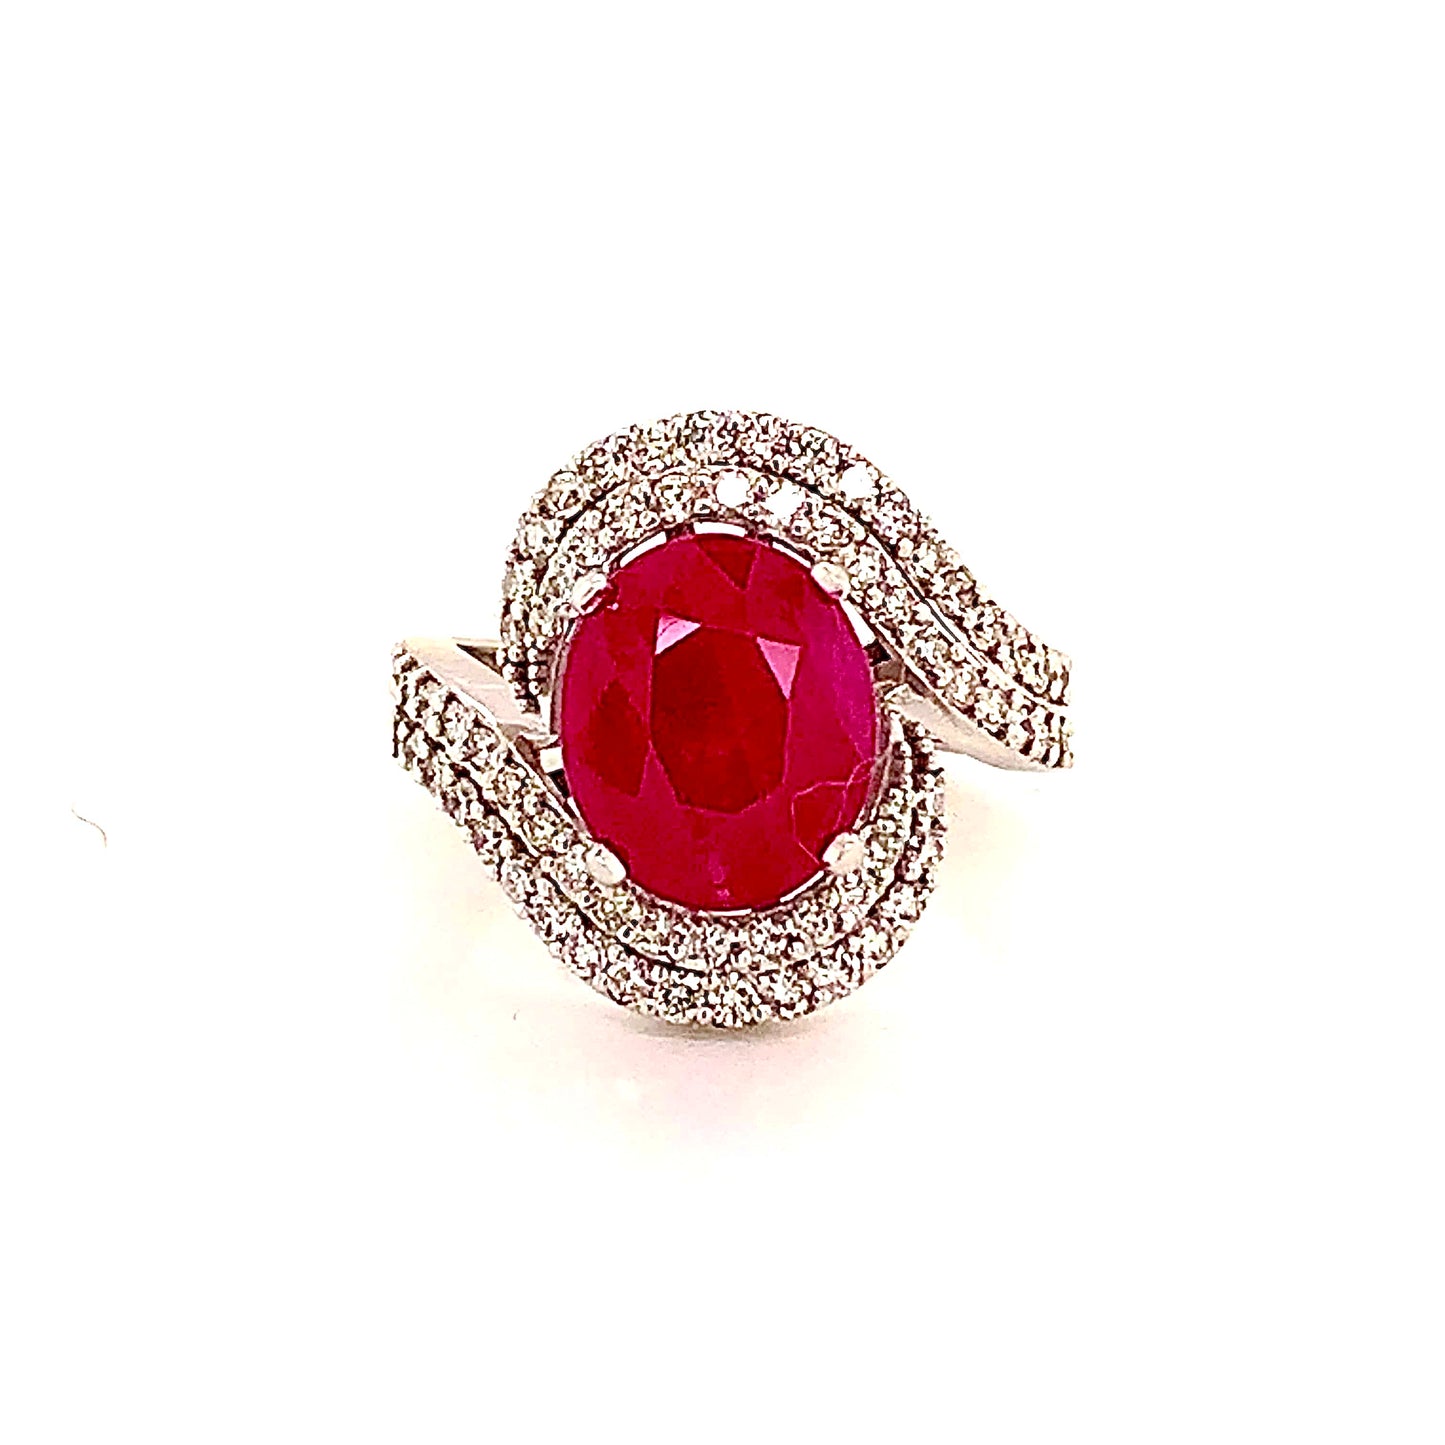 Natural Ruby Diamond Ring 14k Gold 6.32 TCW Size 6.5 GIA Certified $6,975 111872